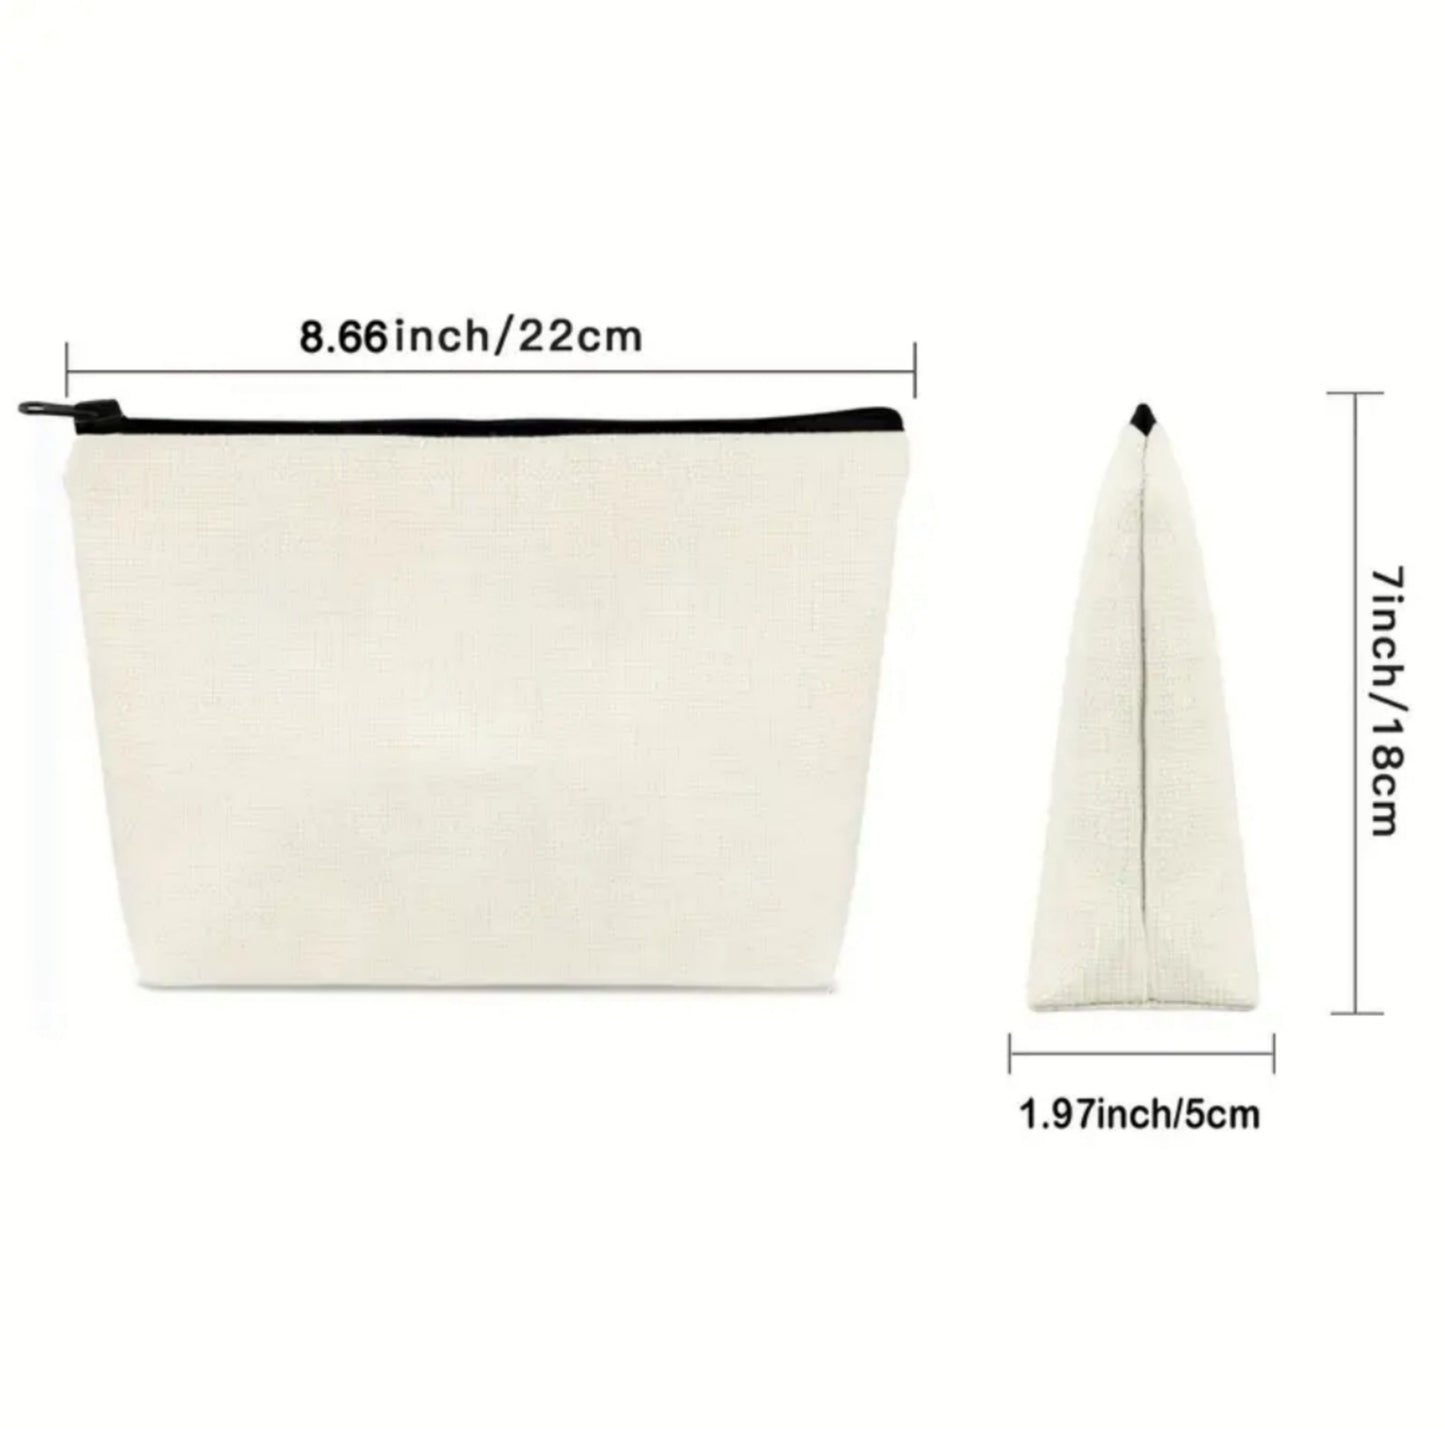 Lock Top "Makeup" Bag | Flat Bottom Canvas Strong High Quality - A Gothic Universe - Bags